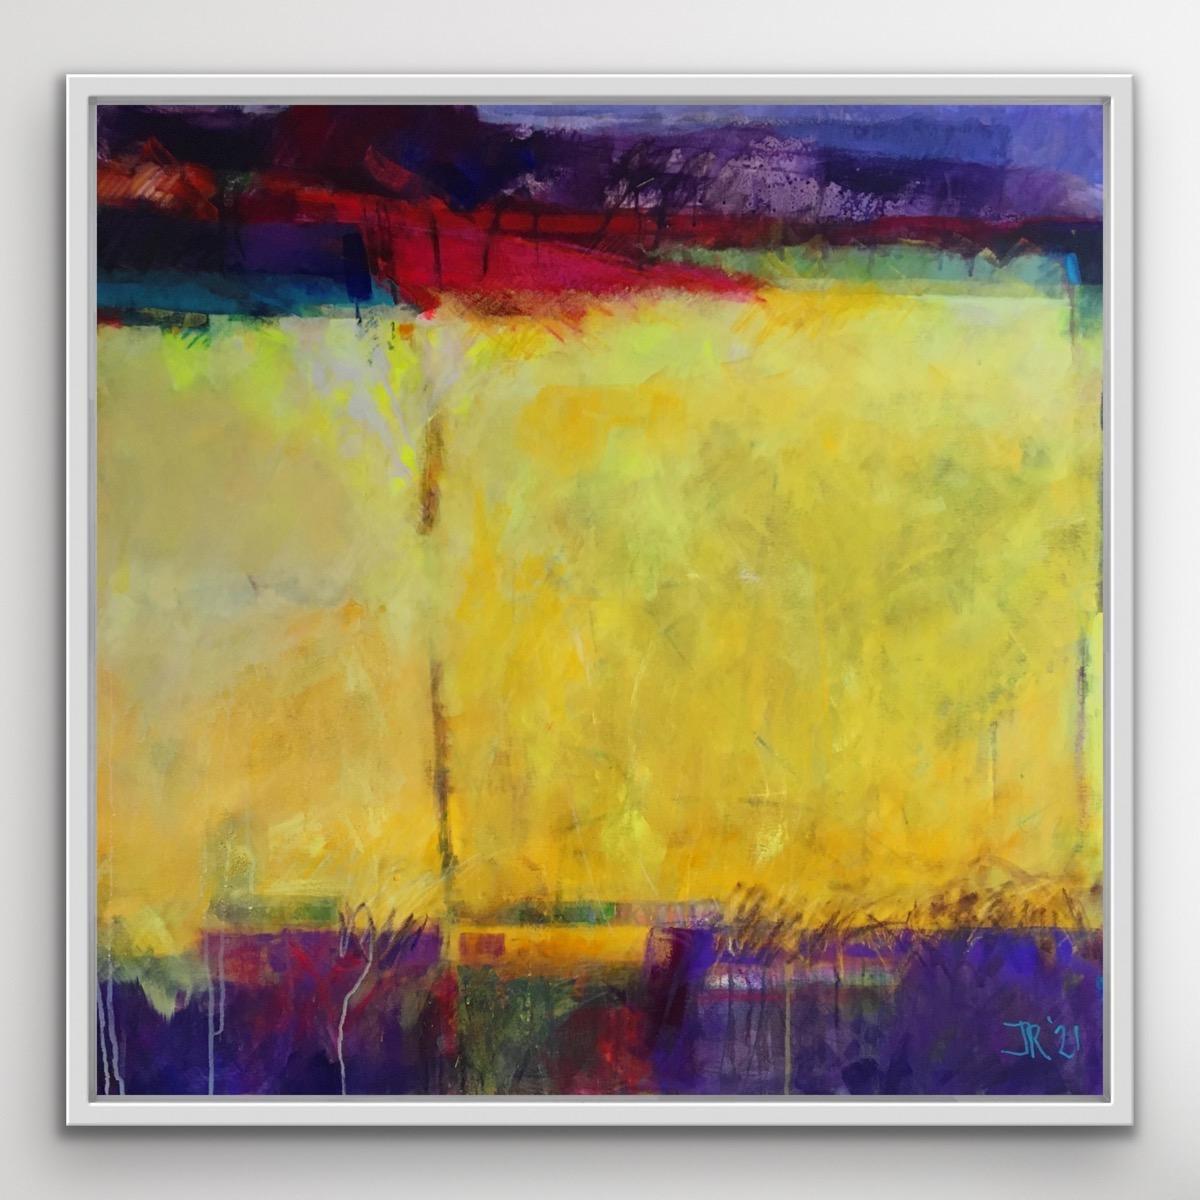 Burned Gold was the Colour, Abstract expressionist, Bright Bold Statement Art  - Brown Landscape Painting by Jon Rowland 